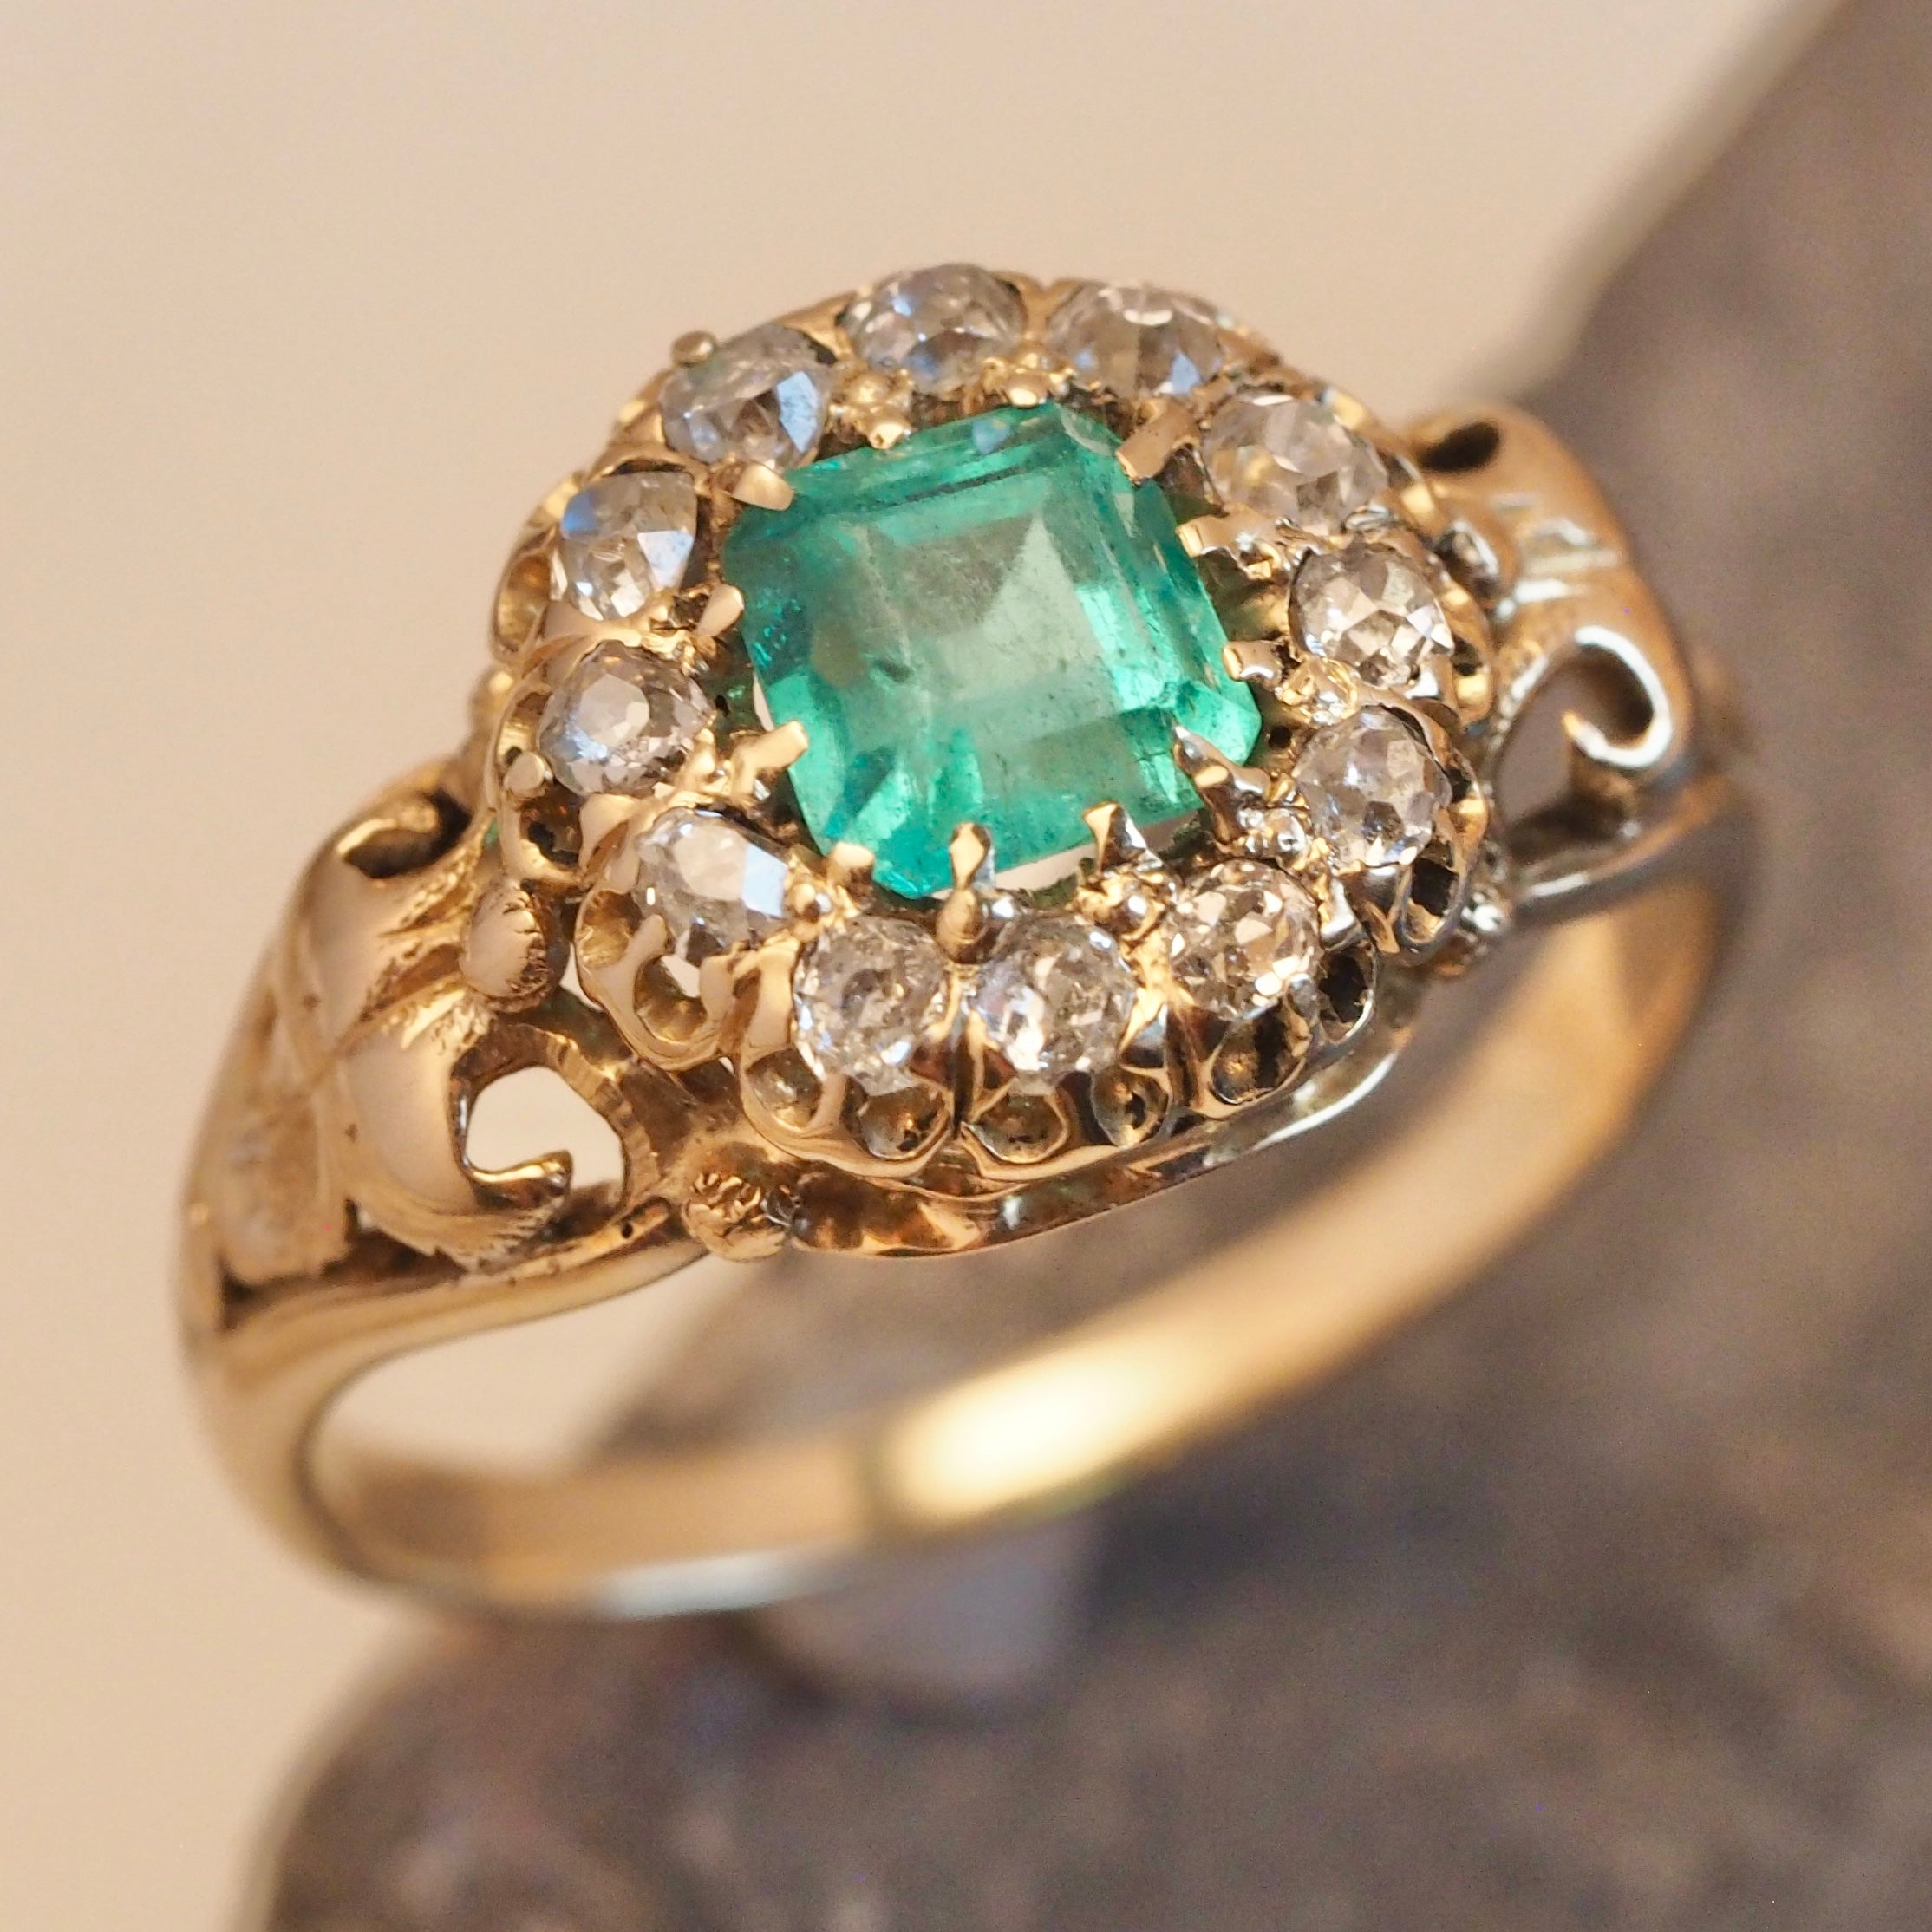 Antique Victorian 14k Gold Emerald and Old Mine Cut Diamond Halo Ring